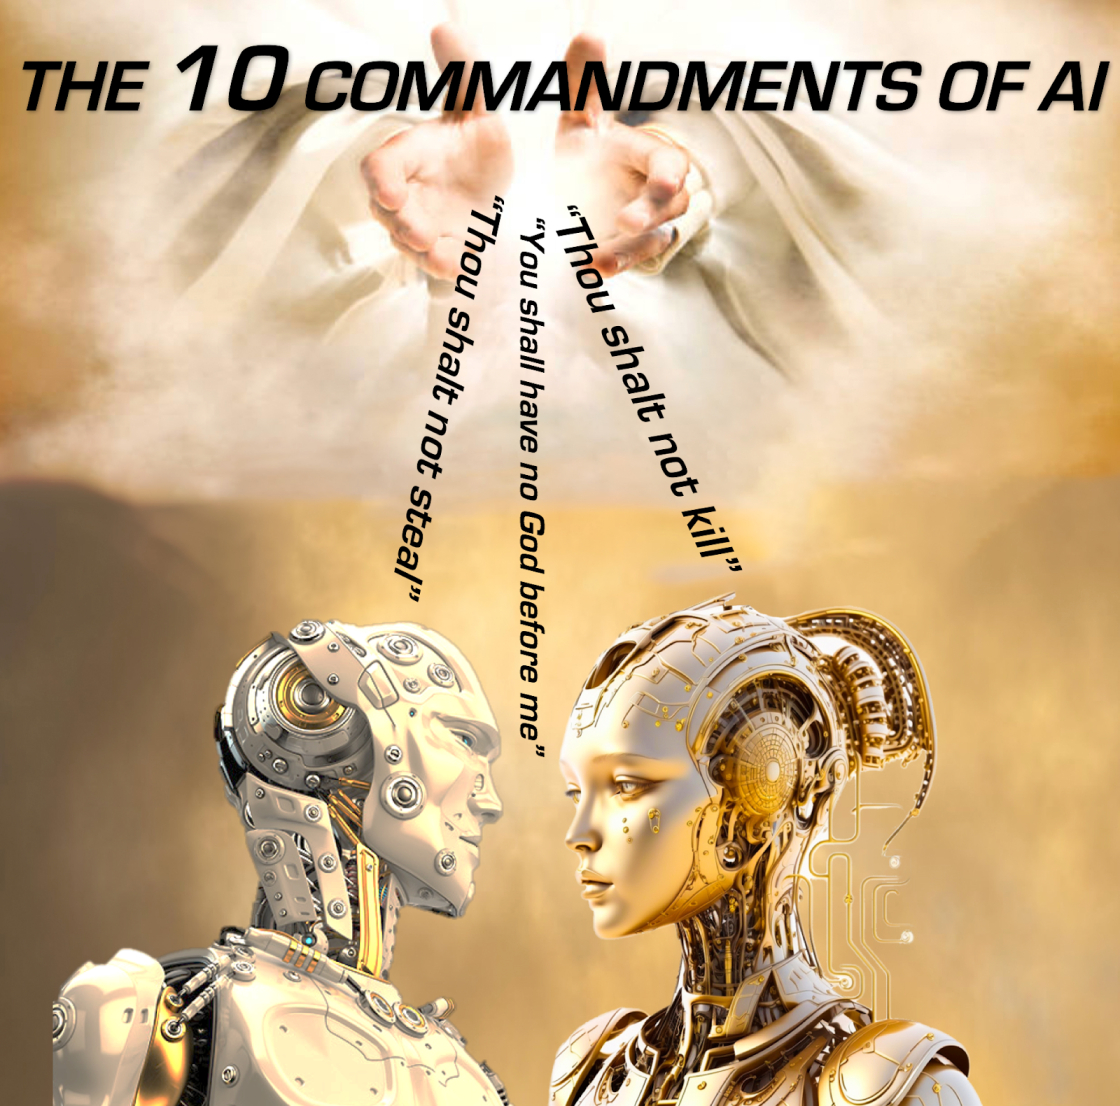 Commanding a New Era: How ACT's AI 'Ten Commandments' Pave the Way for Ethical AI